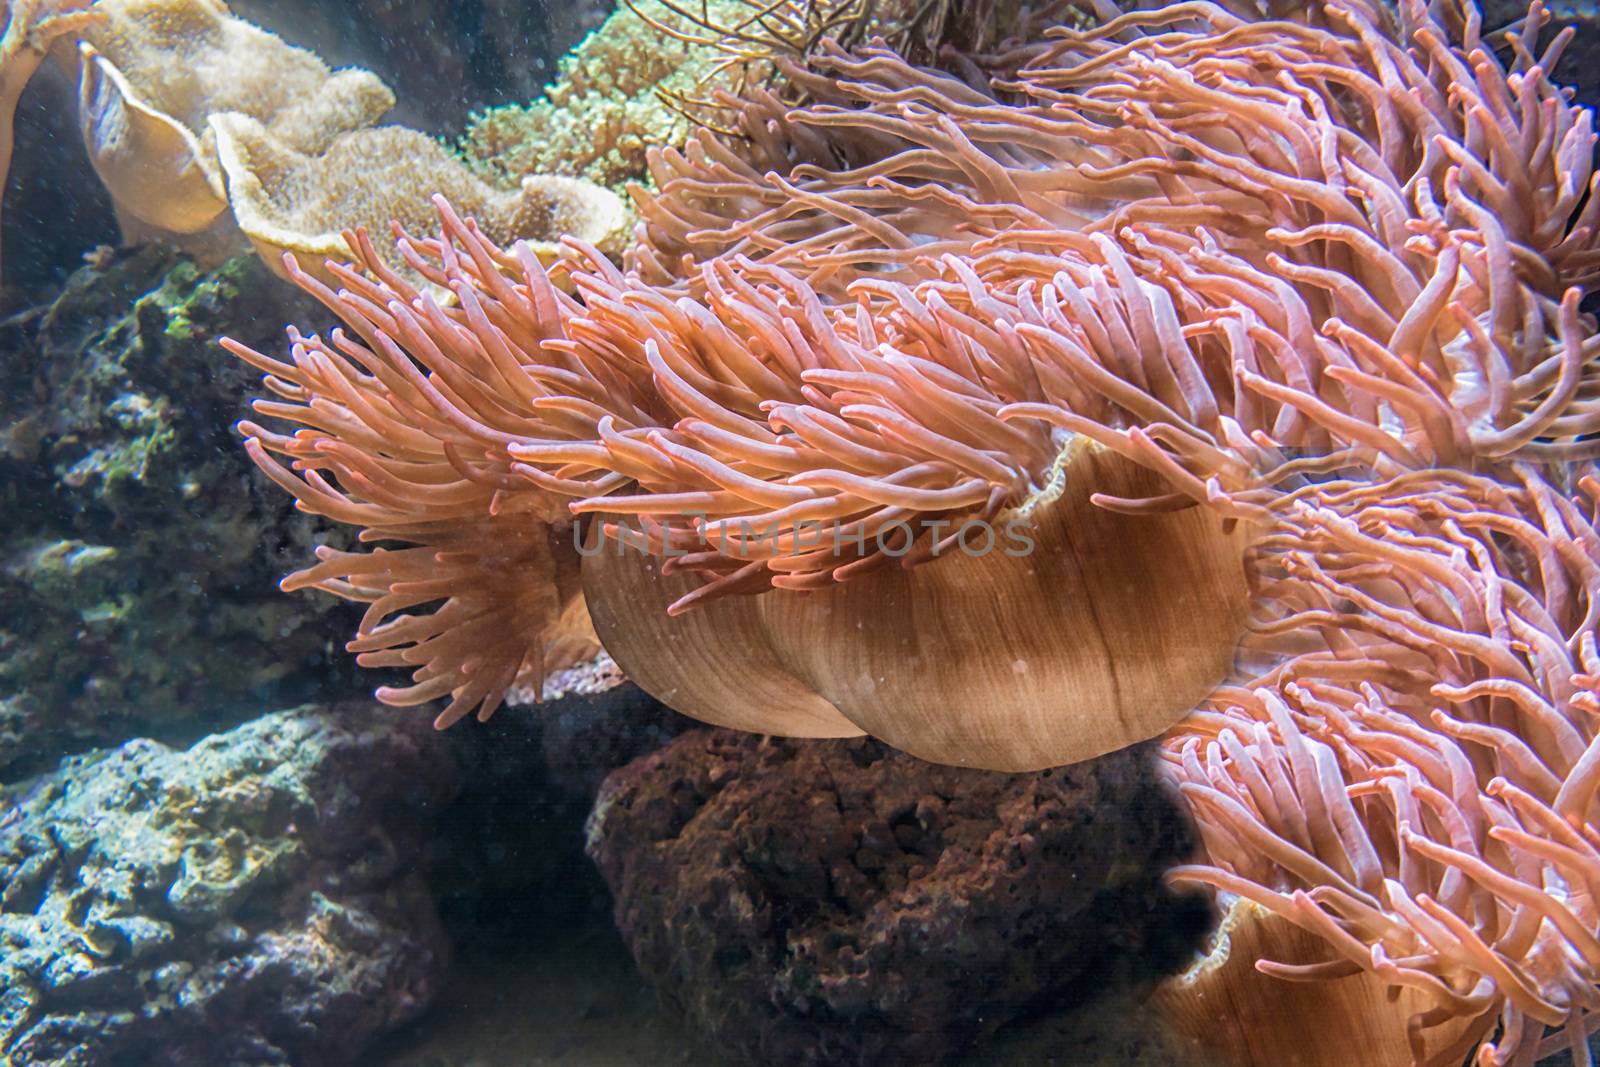 Tentacles of a pink sea anemone by JFsPic